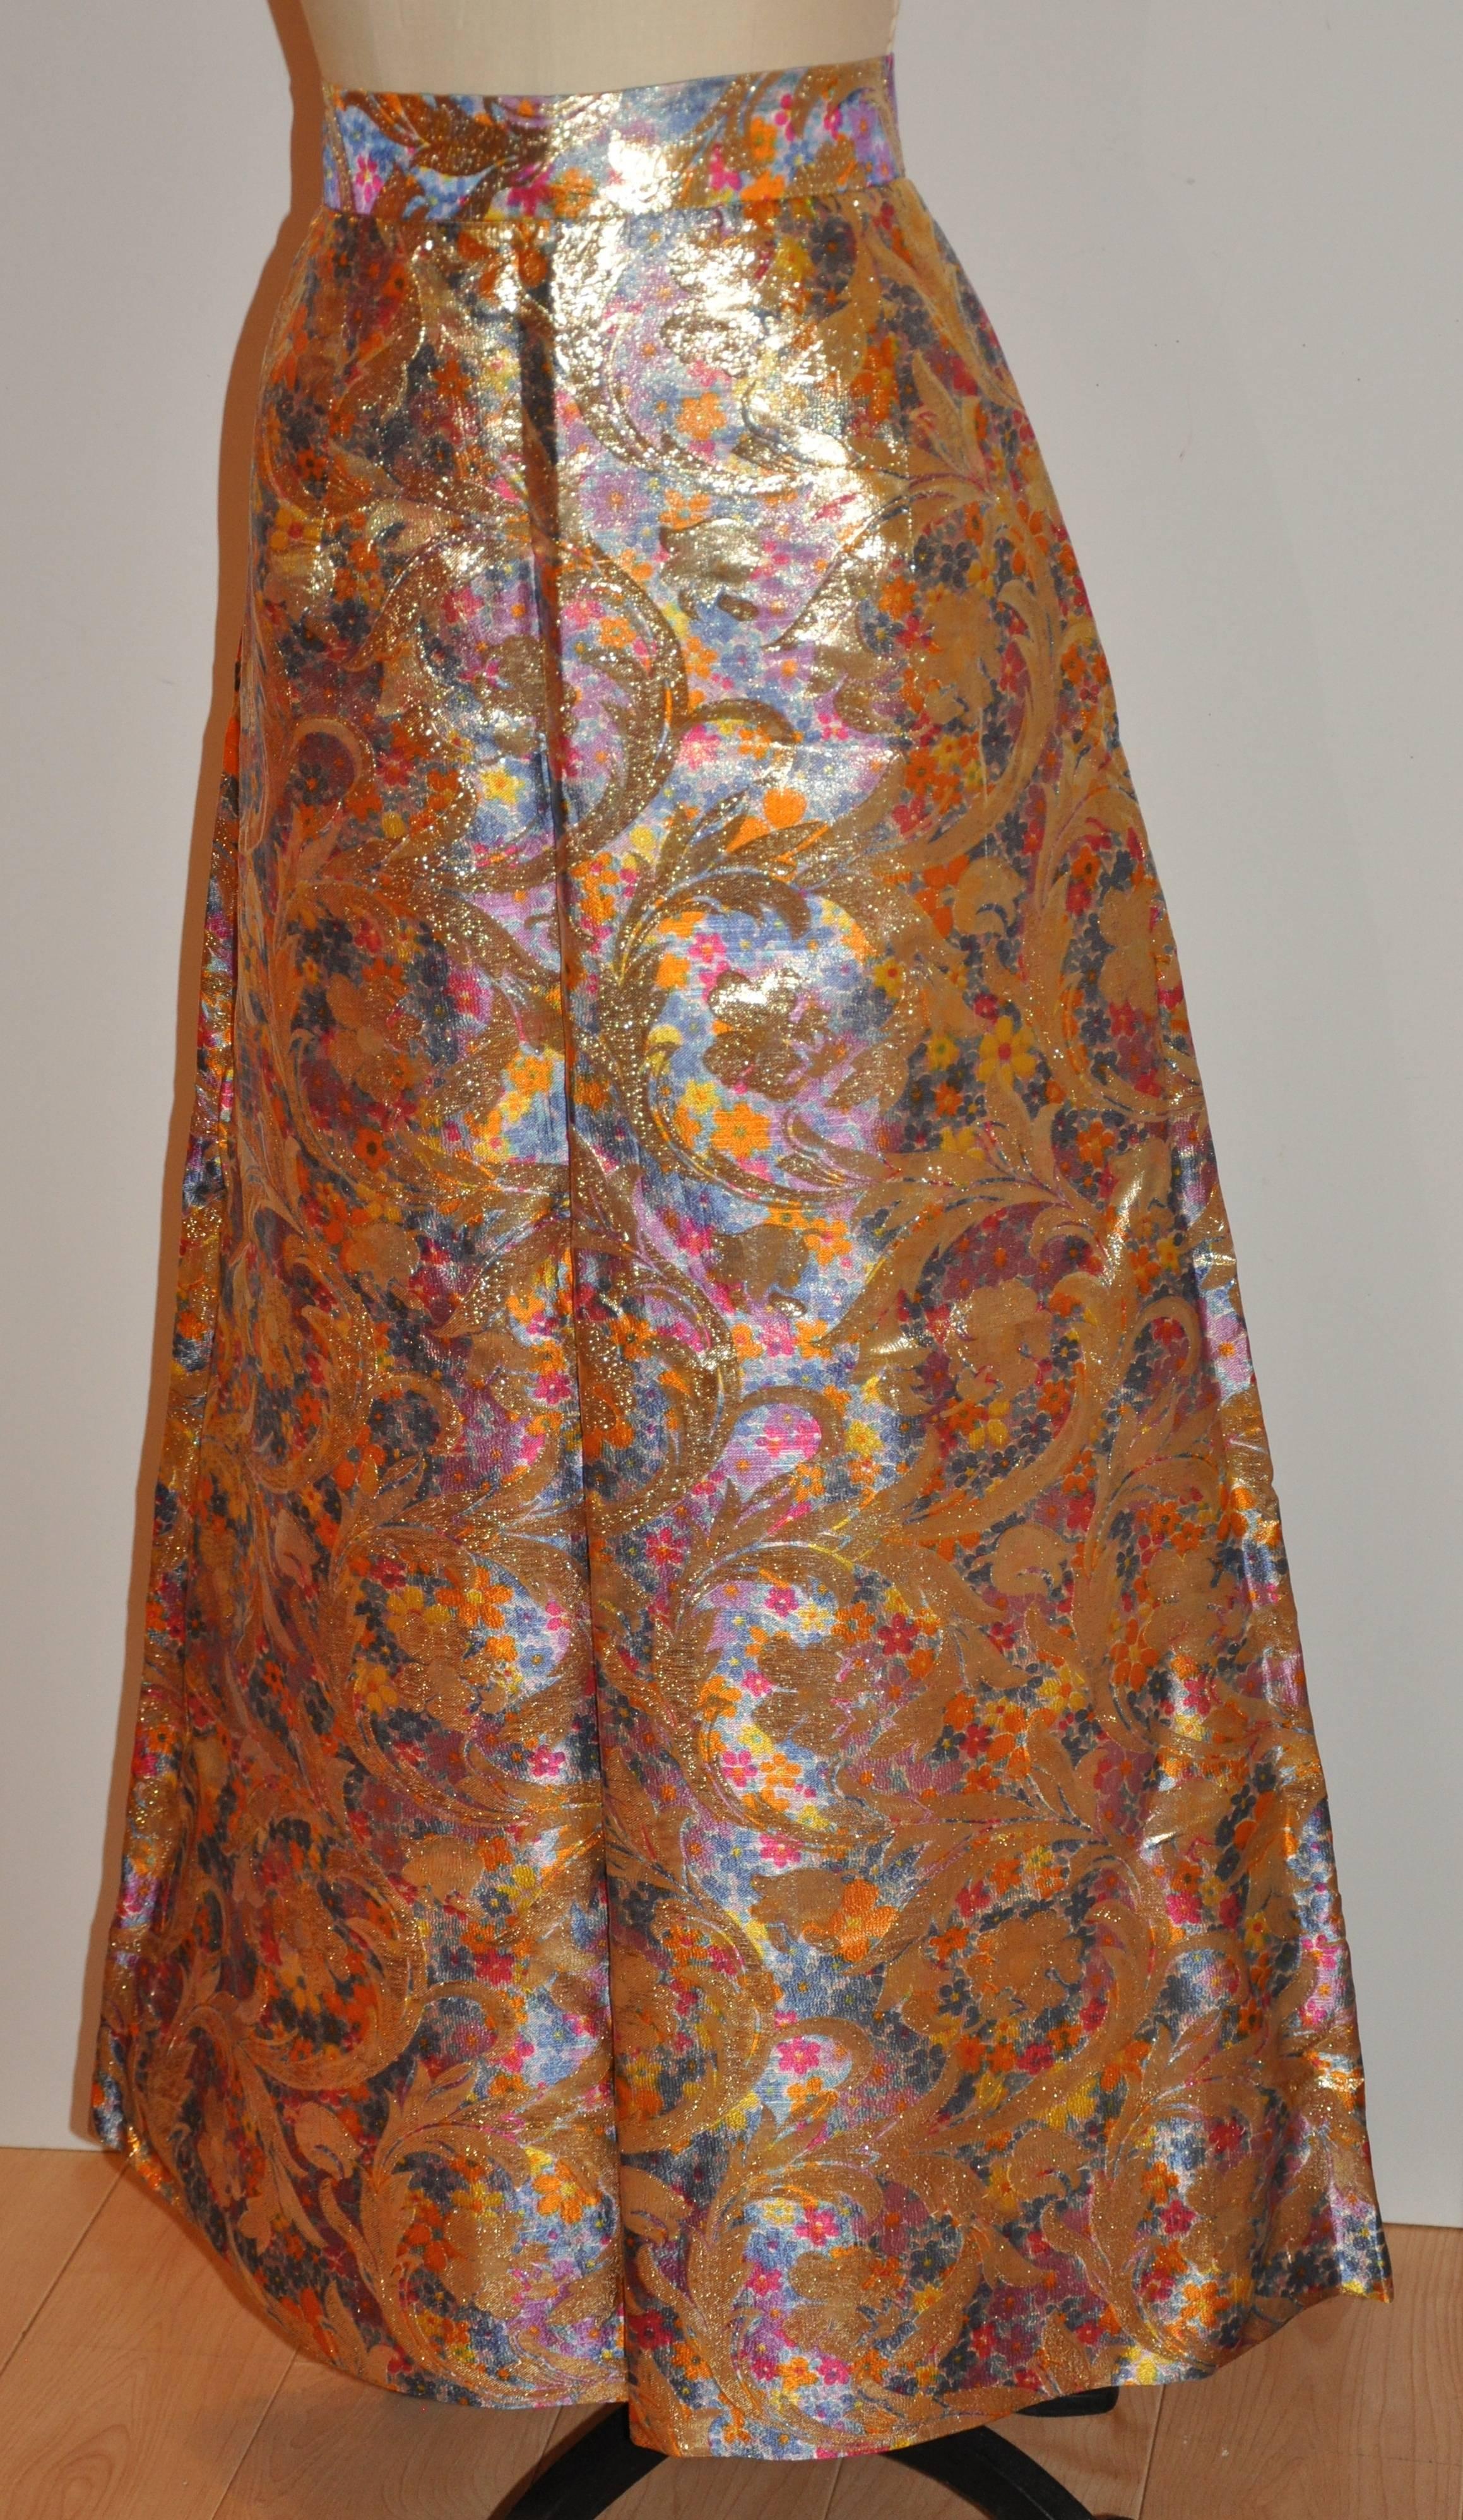 This wonderfully elegant silk brocade floral flare maxi skirt is accented with elaborate gold lame floral weave as well. The waistband width measures 1 7/8", waist is 30", hips are 49", length is 39 1/2", hem circumference is